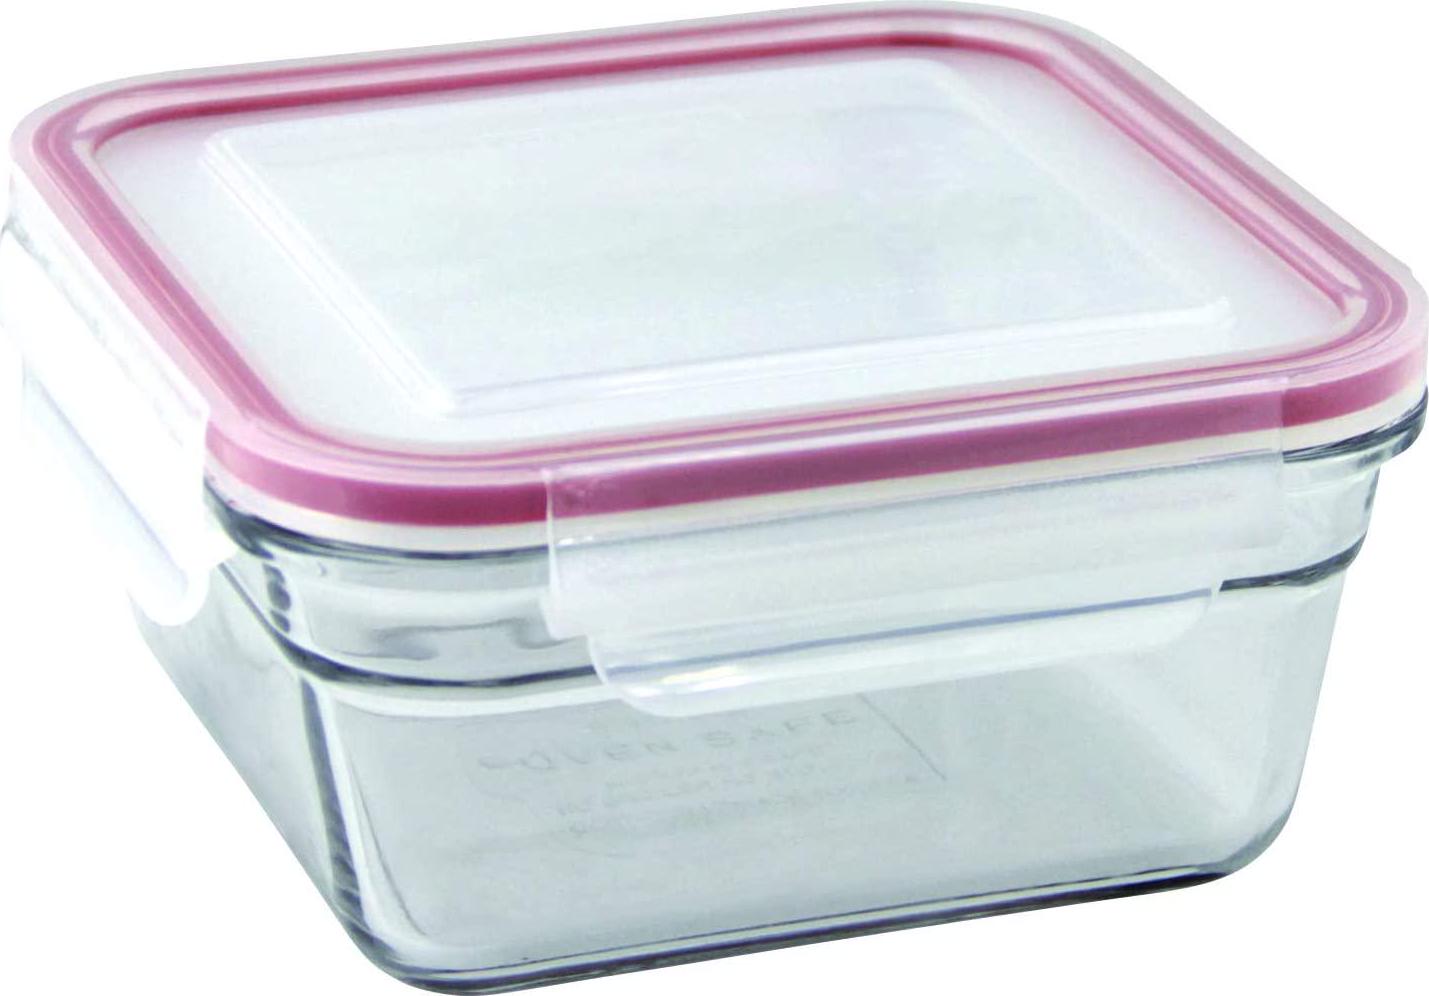 GLASSLOCK, Glasslock Oven Safe Glass Container, 9-Piece Set, Clear, GL-474